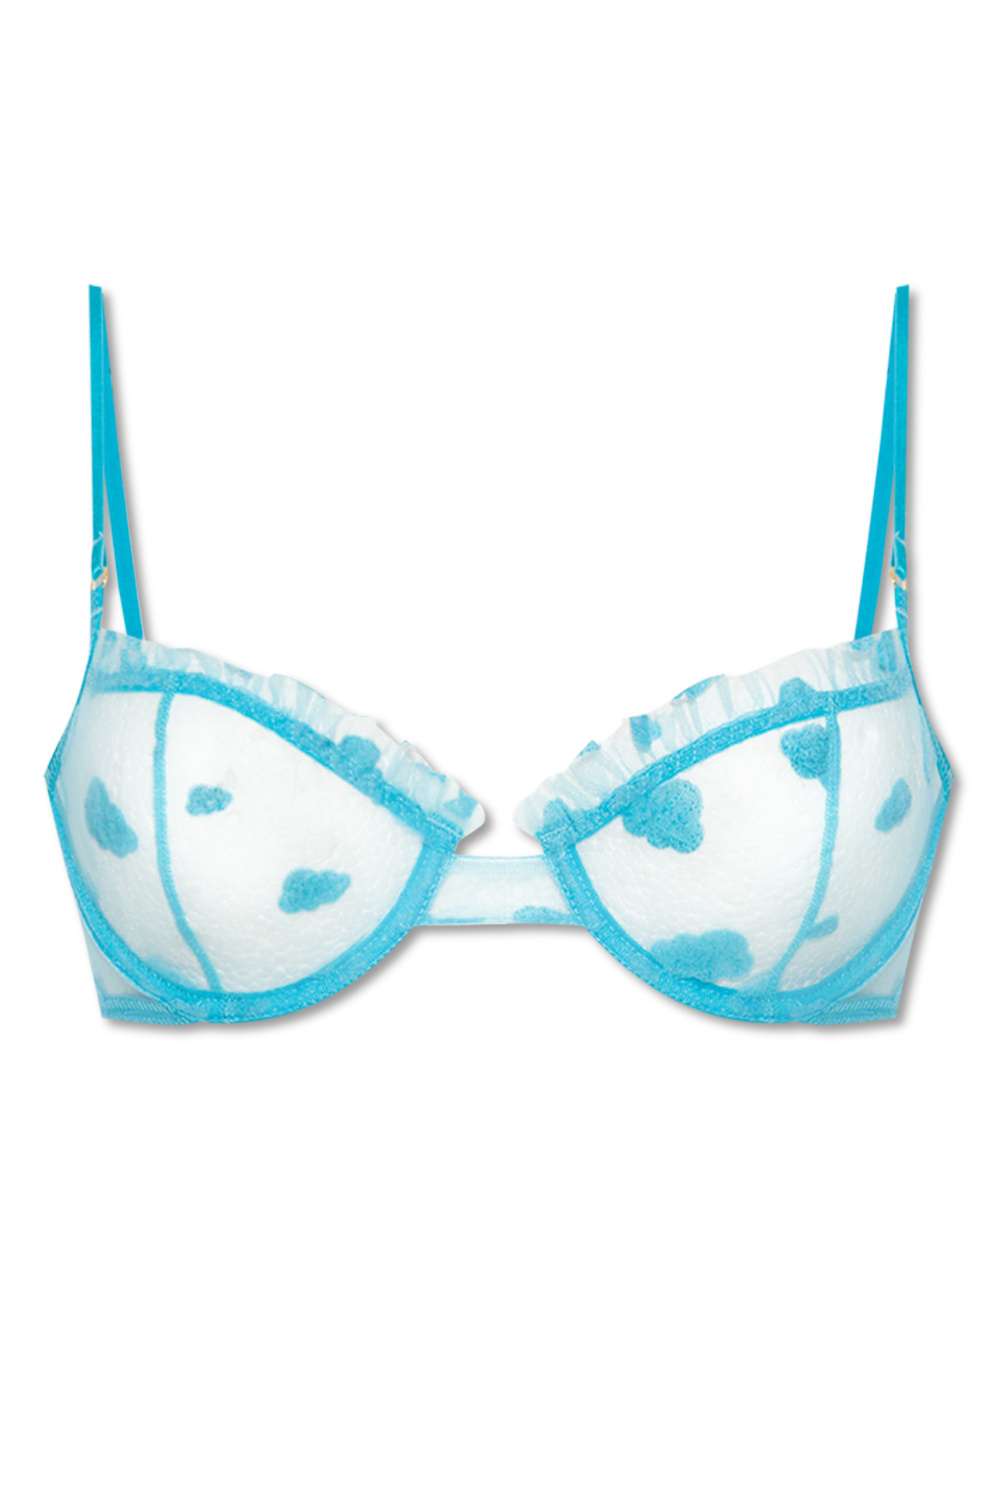 Download the updated version of the app ‘Nuage’underwire bra